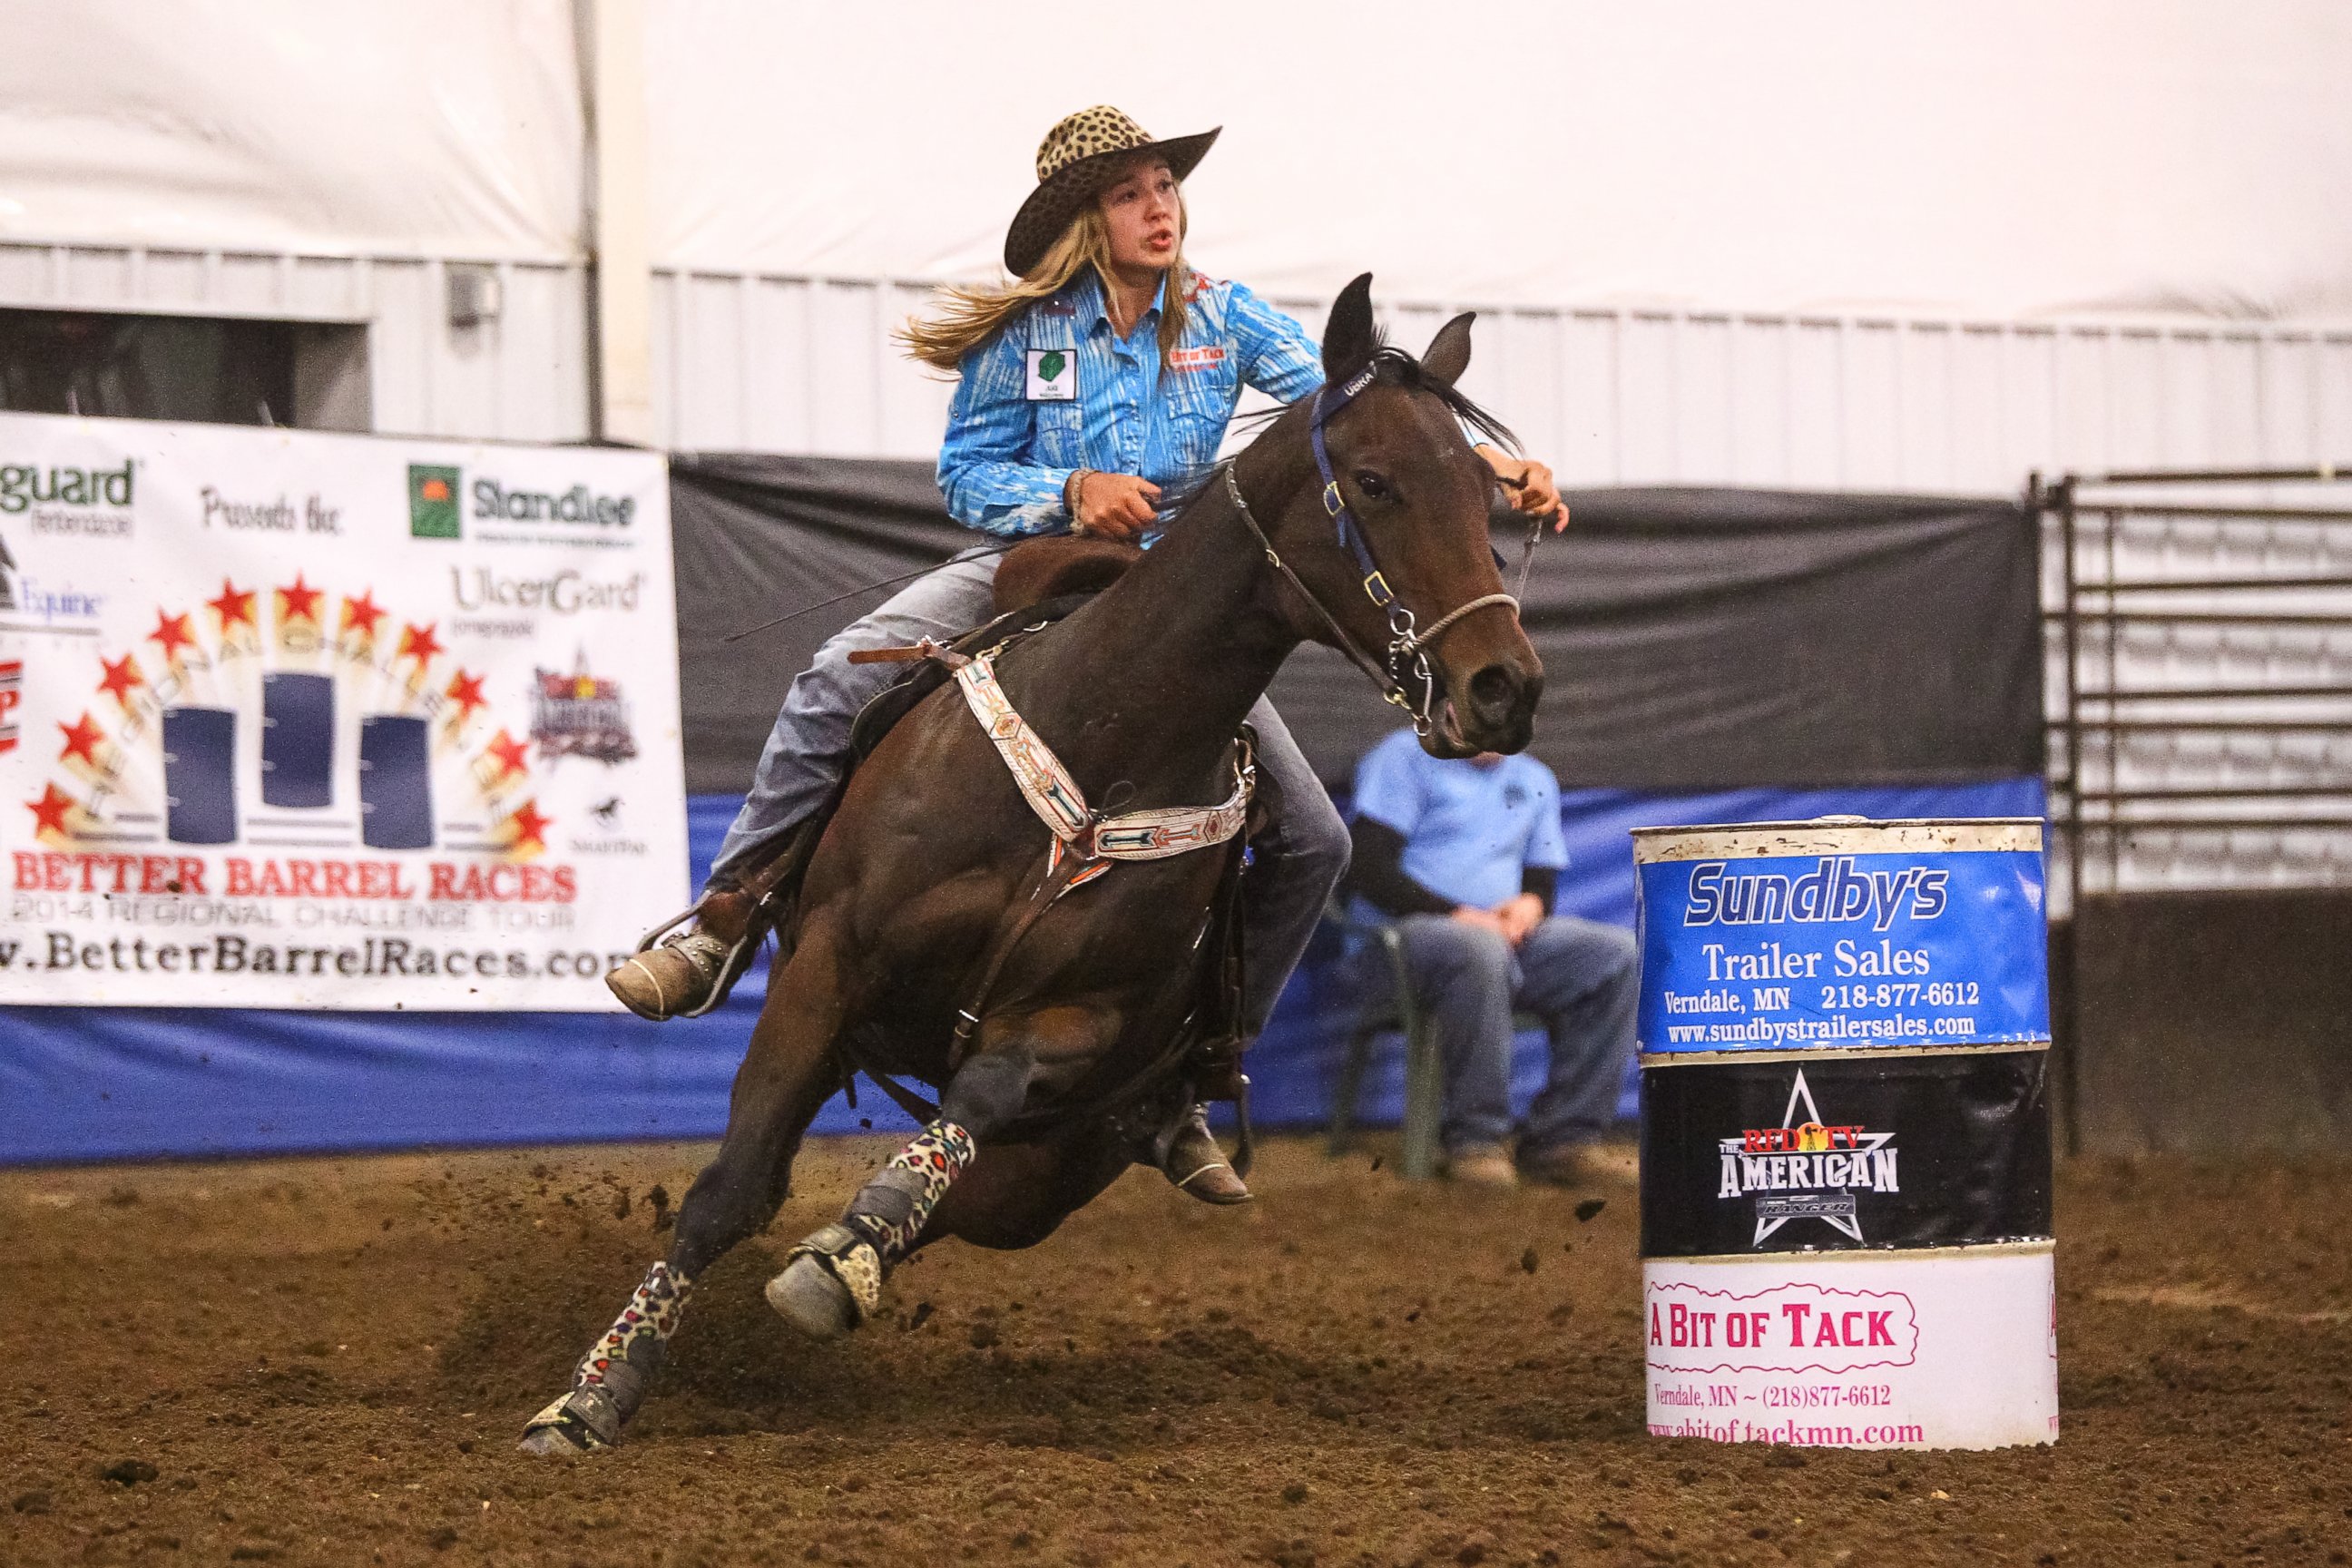 PHOTO: Adeline Nevala, seen here in competition, will compete in The
American Rodeo, an event in Arlington, Texas.